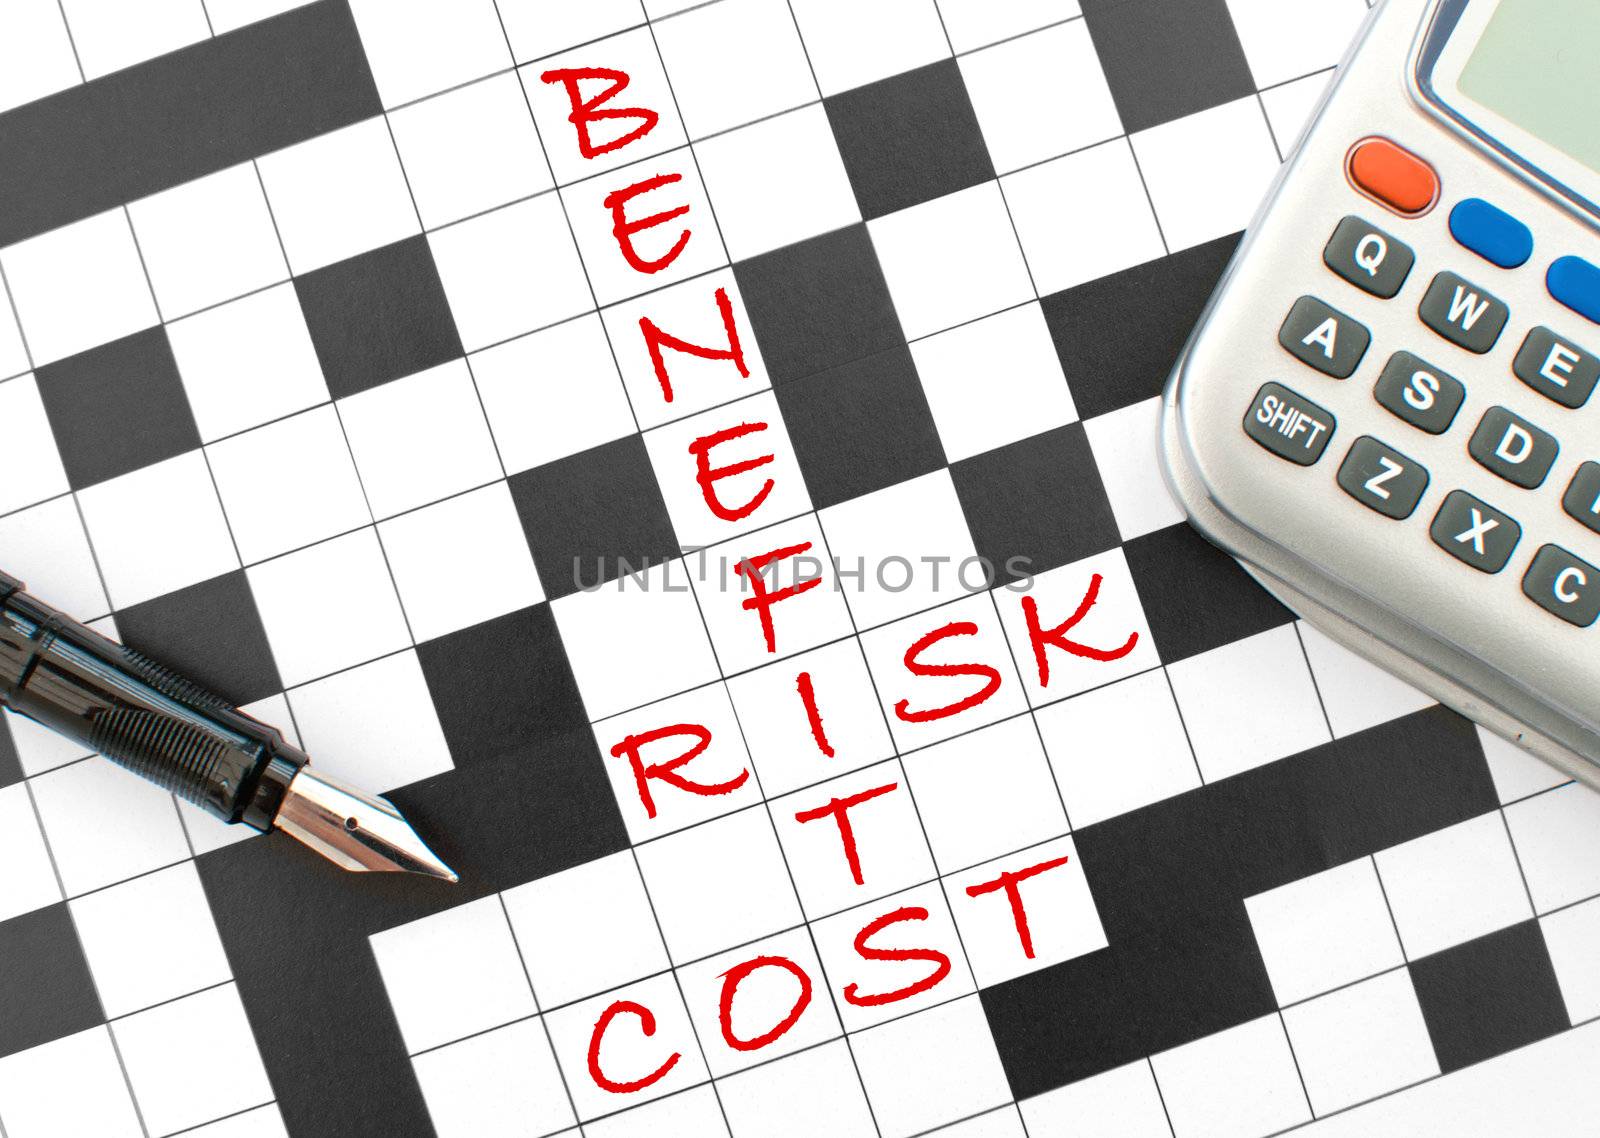 Benefits, risk and cost crossword puzzle